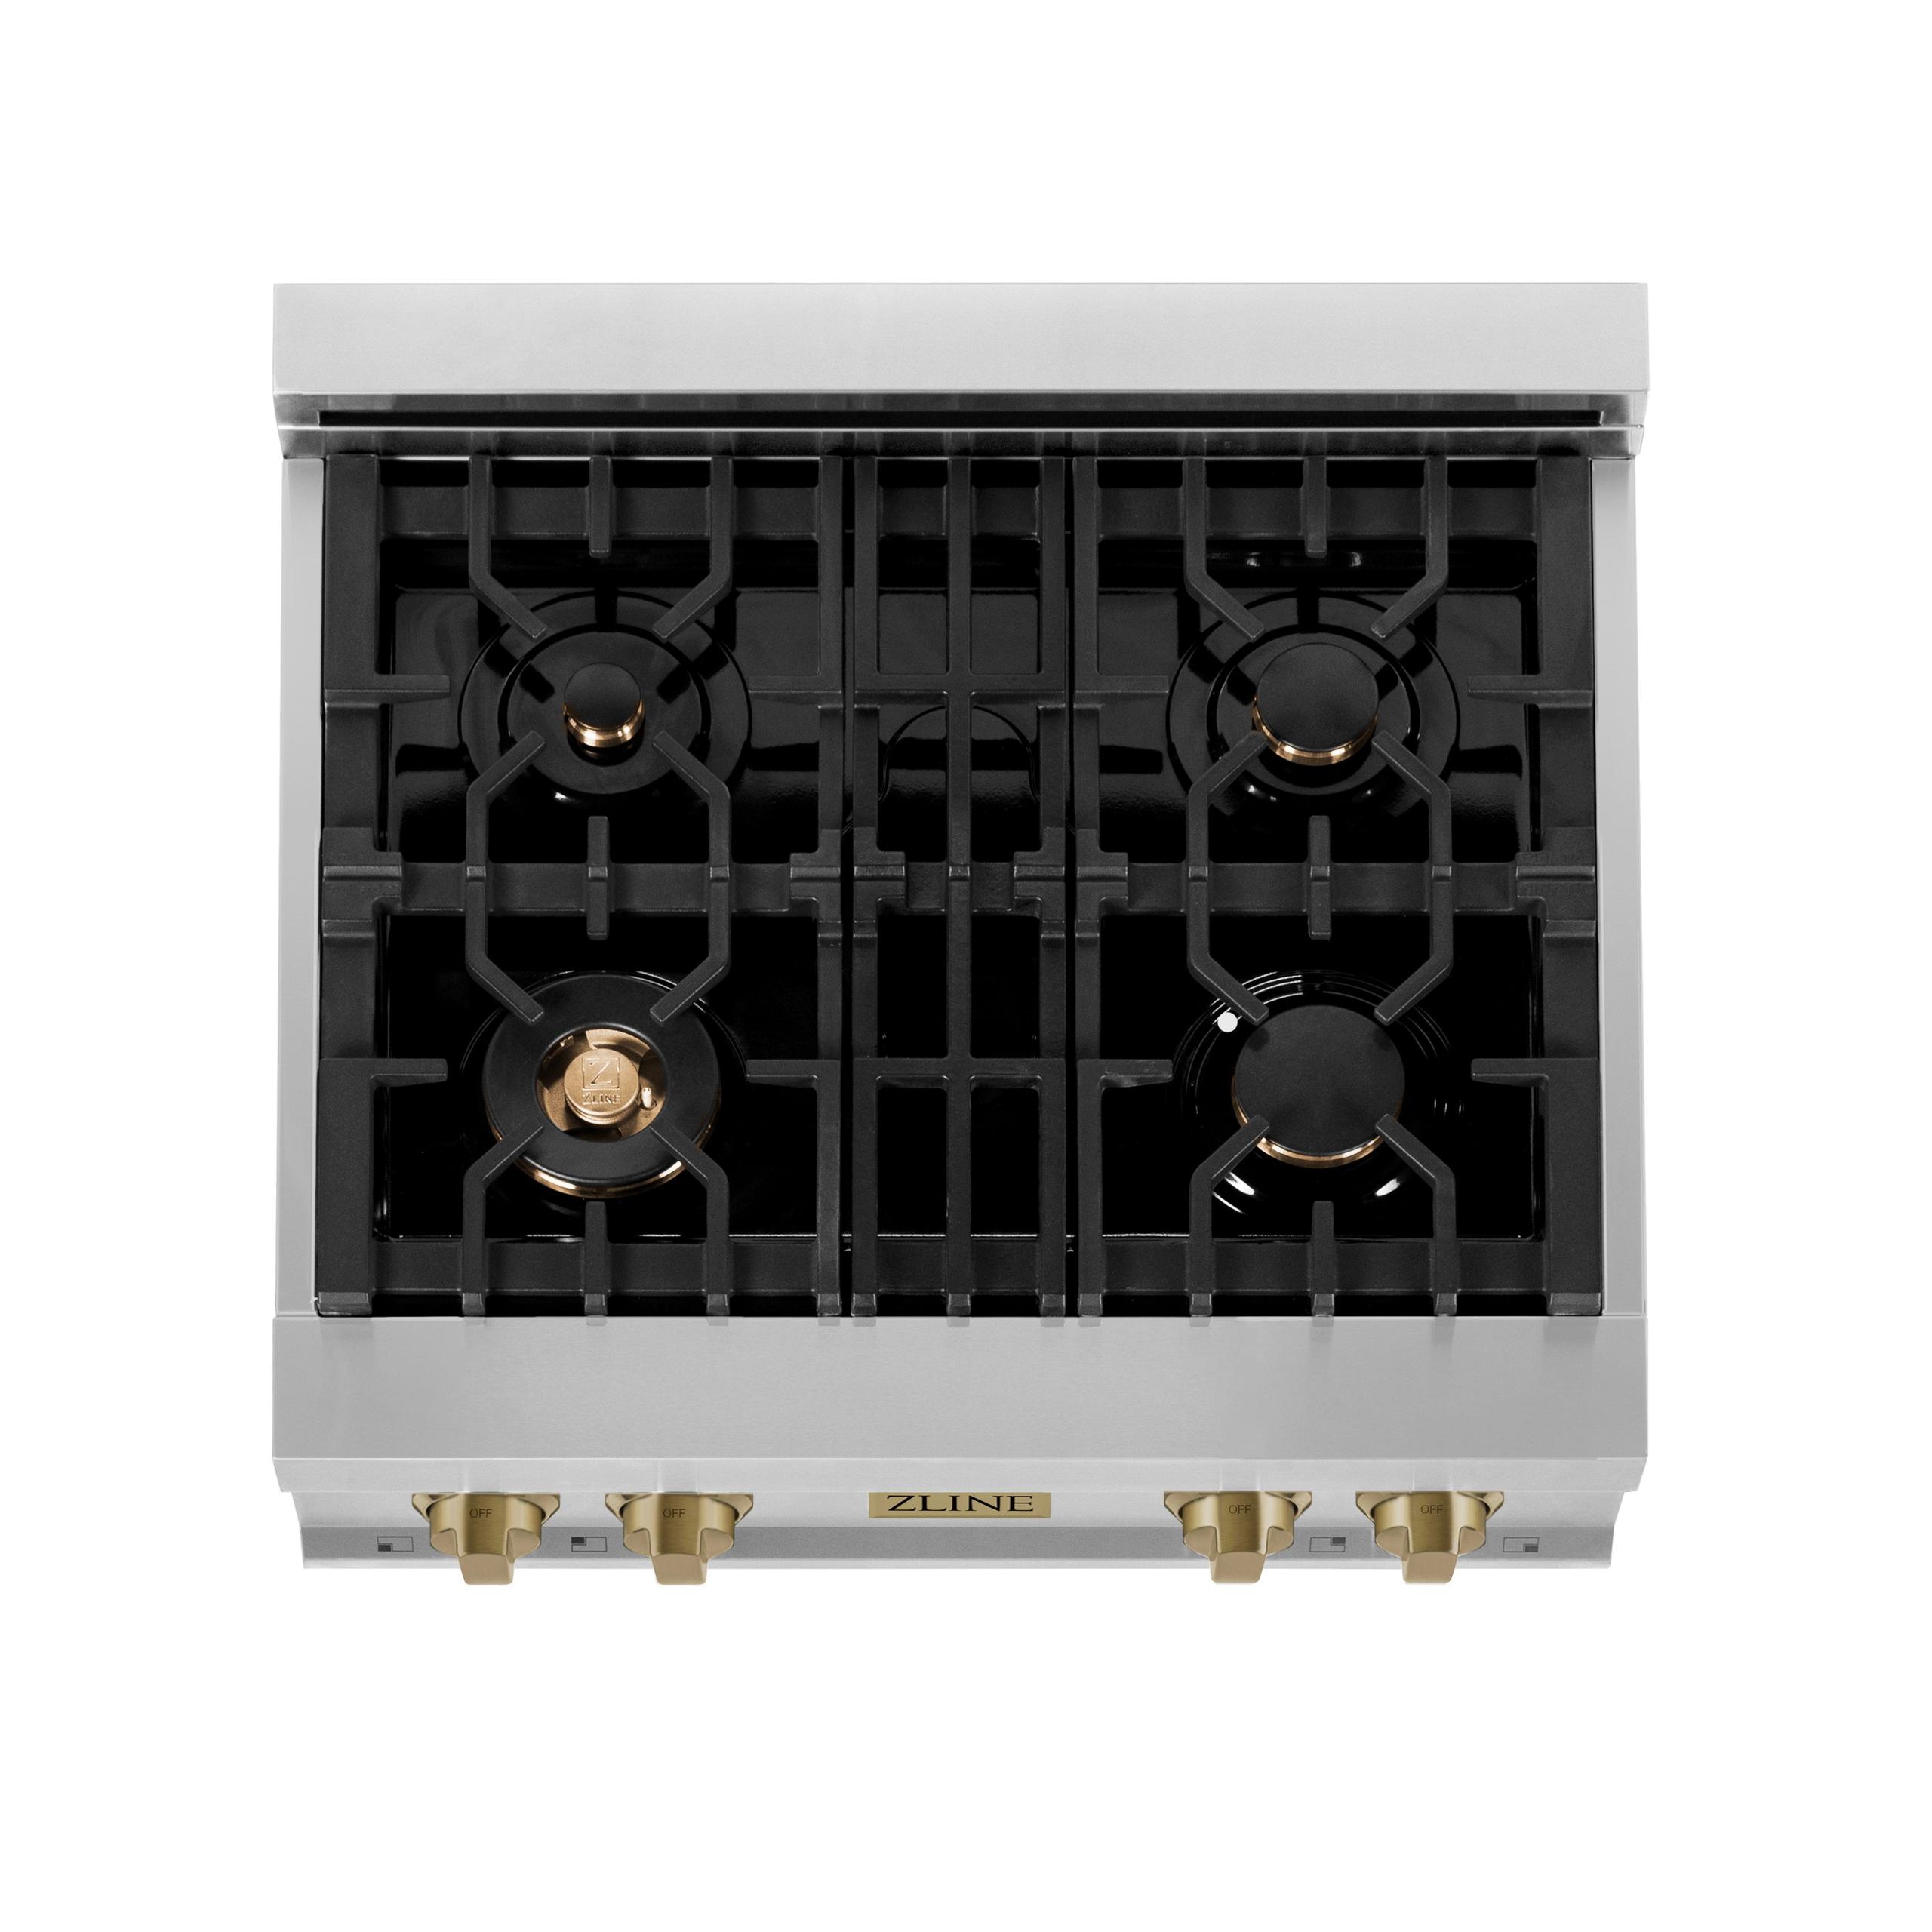 ZLINE KITCHEN AND BATH RTZ30G ZLINE Autograph Edition 30" Porcelain Rangetop with 4 Gas Burners in Stainless Steel with Accents Accent: Gold